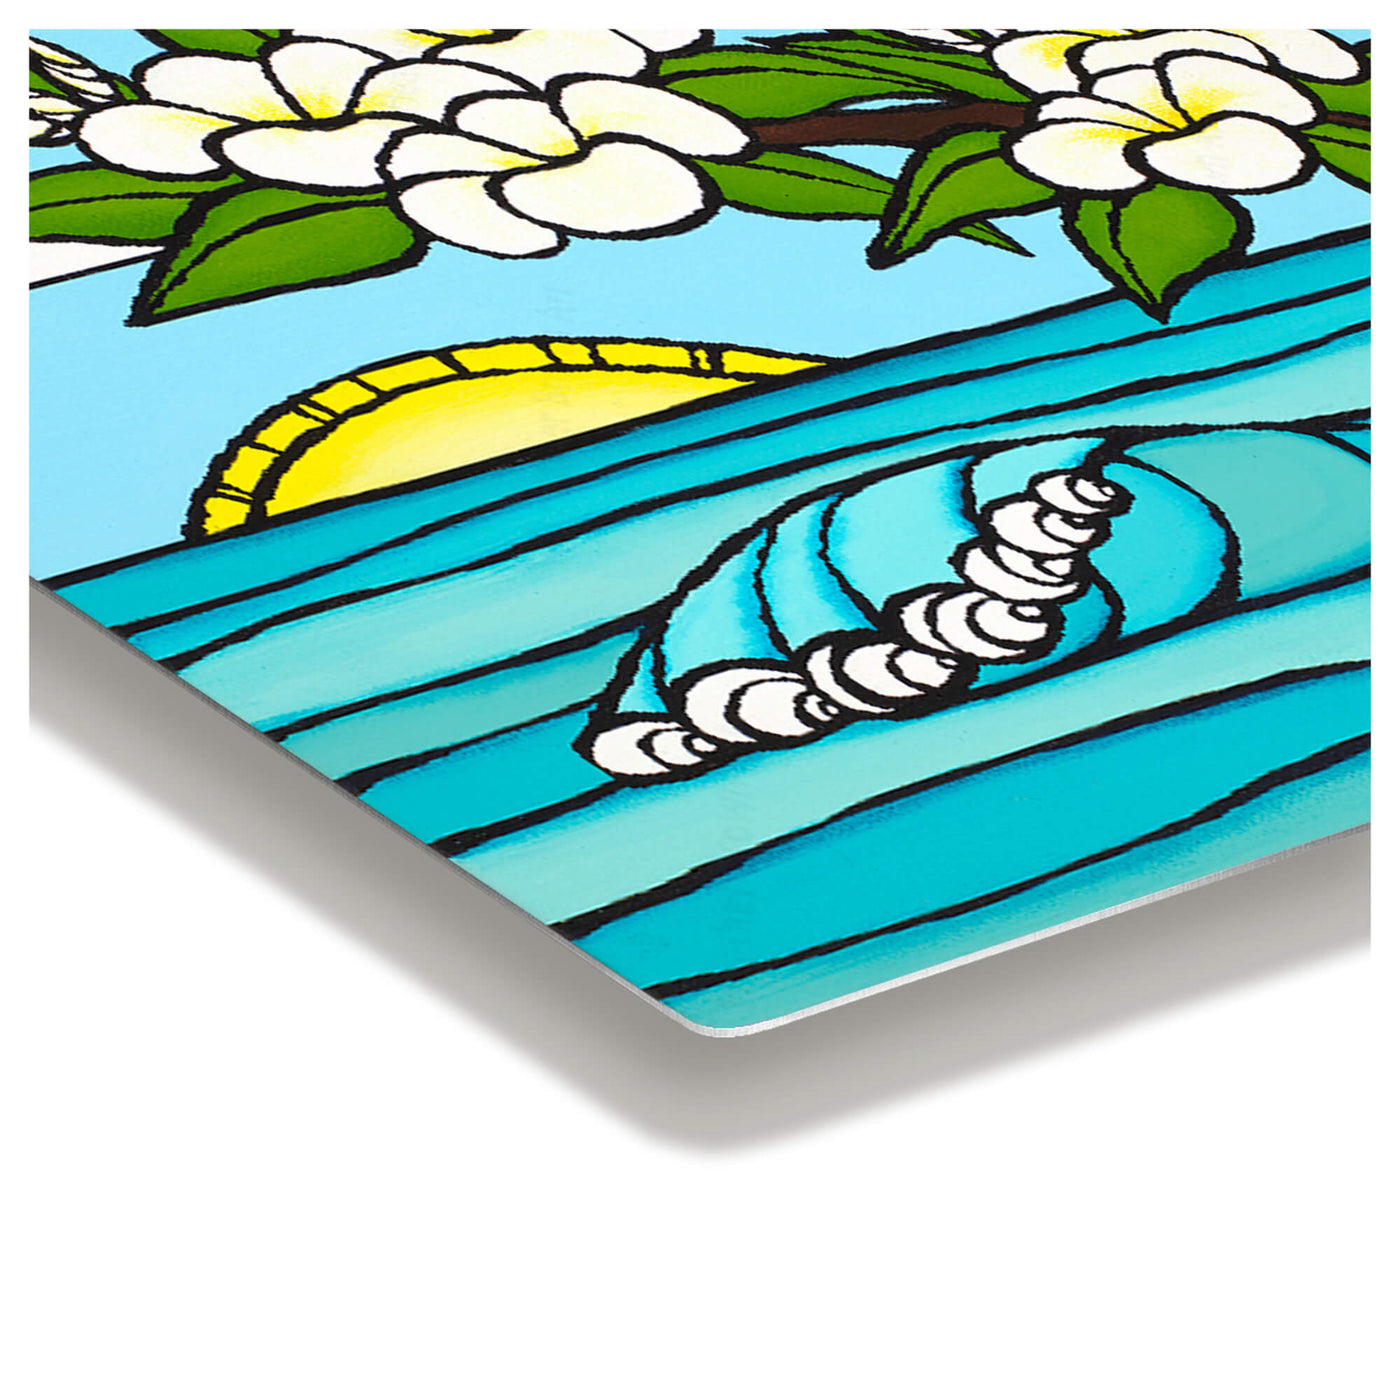 Metal art print edge details of a sunrise with rolling waves and plumeria flowers by Hawaii surf artist Heather Brown